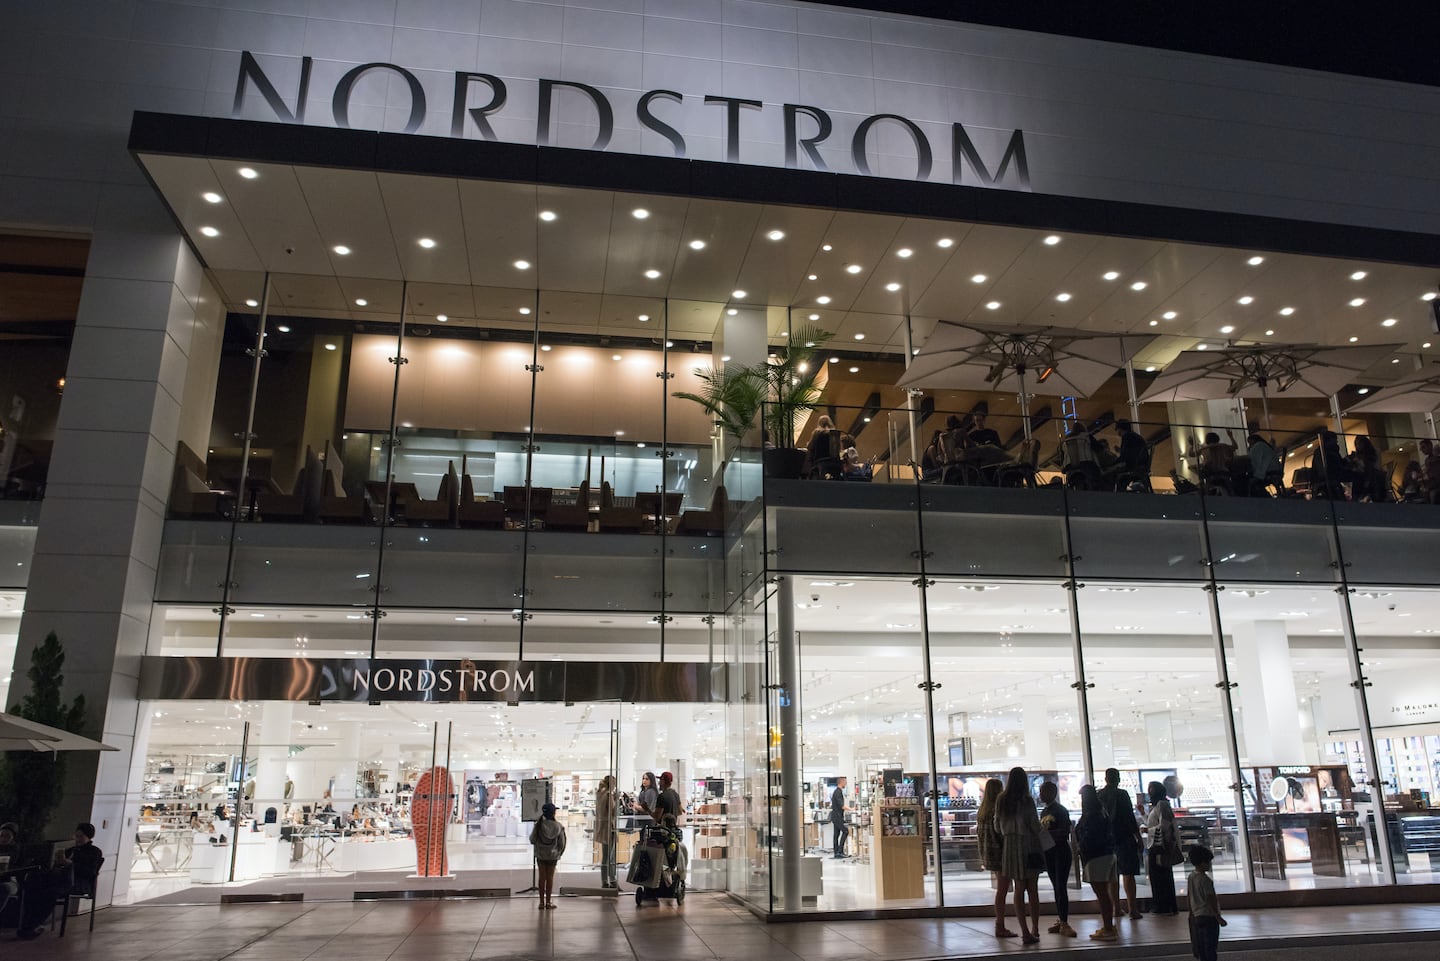 Nordstrom at The Grove, Los Angeles | Source: Shutterstock